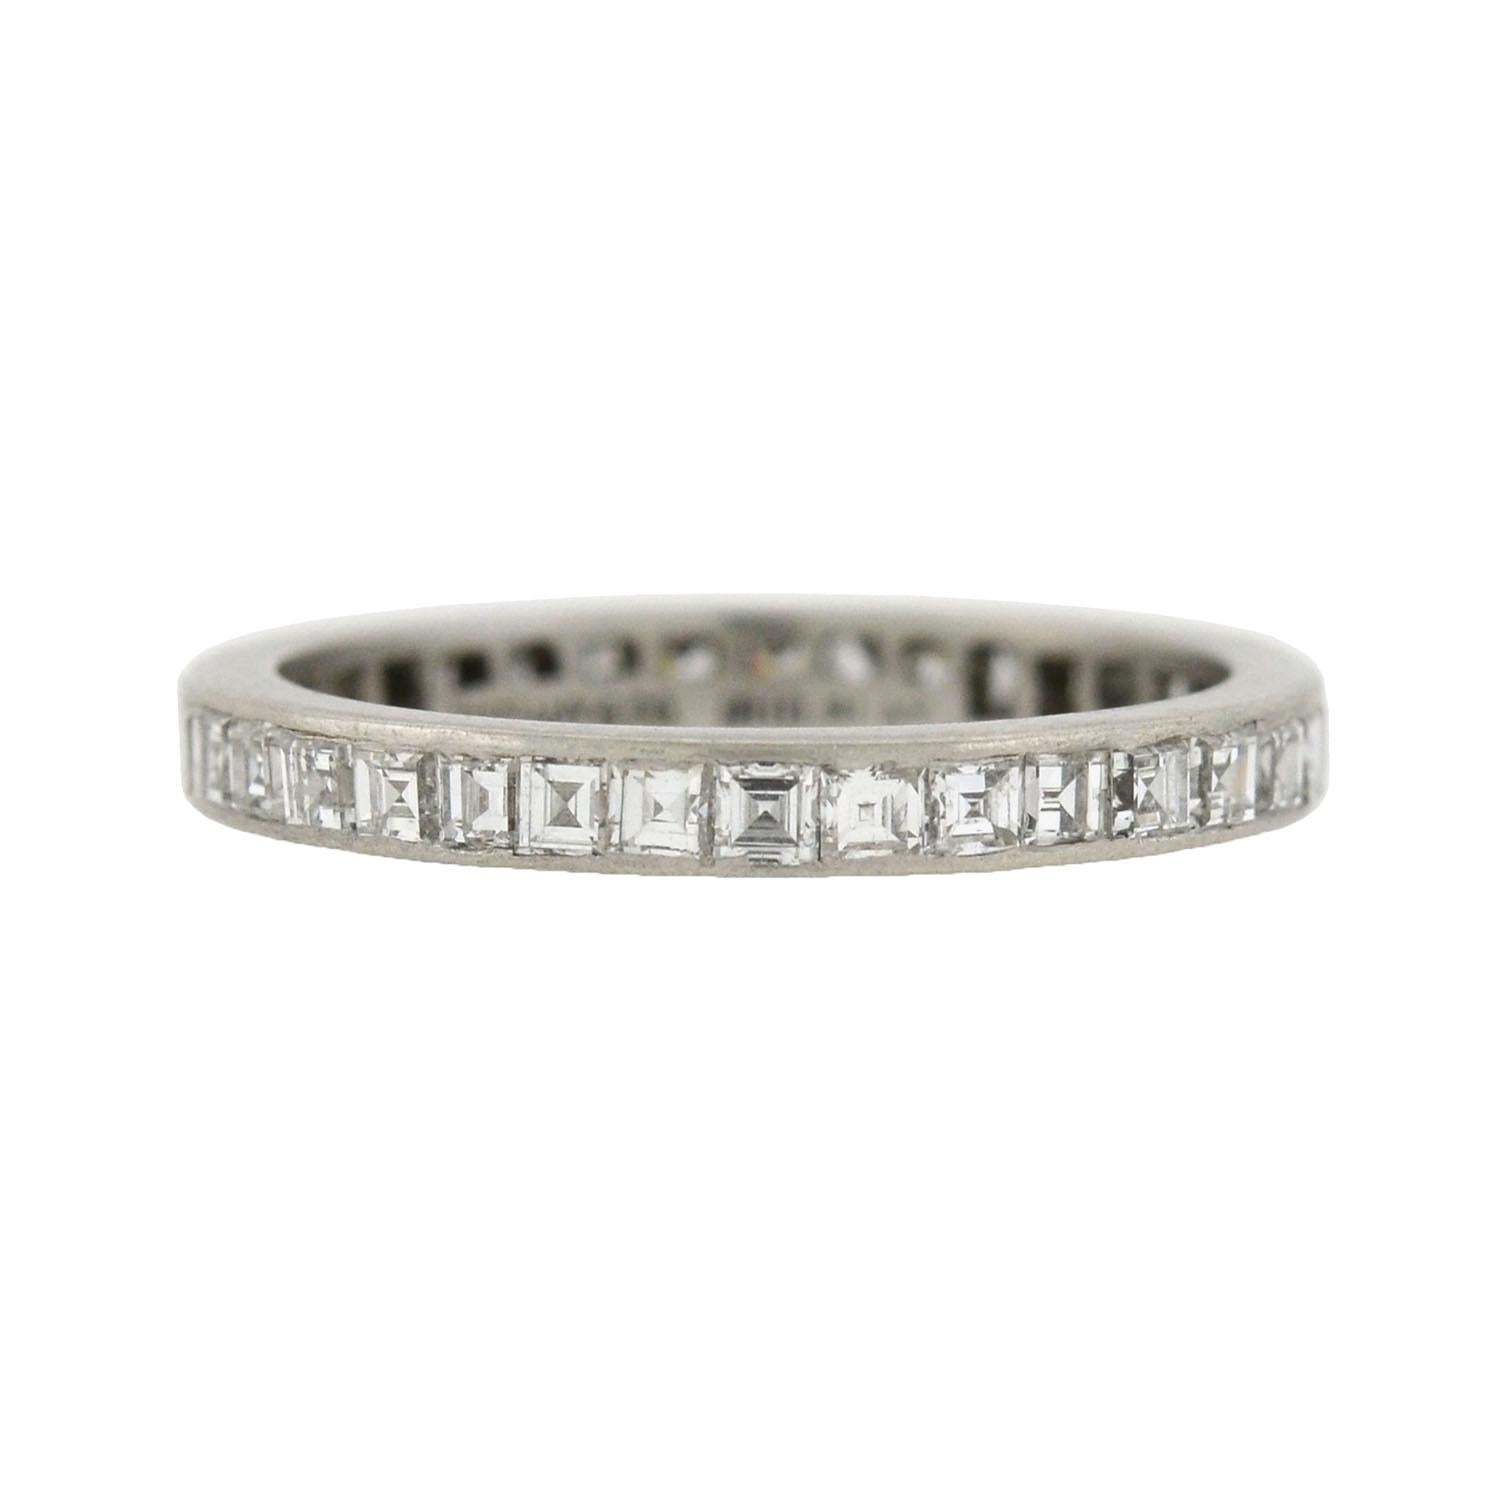 This gorgeous diamond eternity band is a signed Tiffany & Co. ring from the Art Deco (ca1920) era! Made of platinum, the ring features a row of beautiful Carré Cut diamonds, which carry all the way around the outer surface in a continuous channel